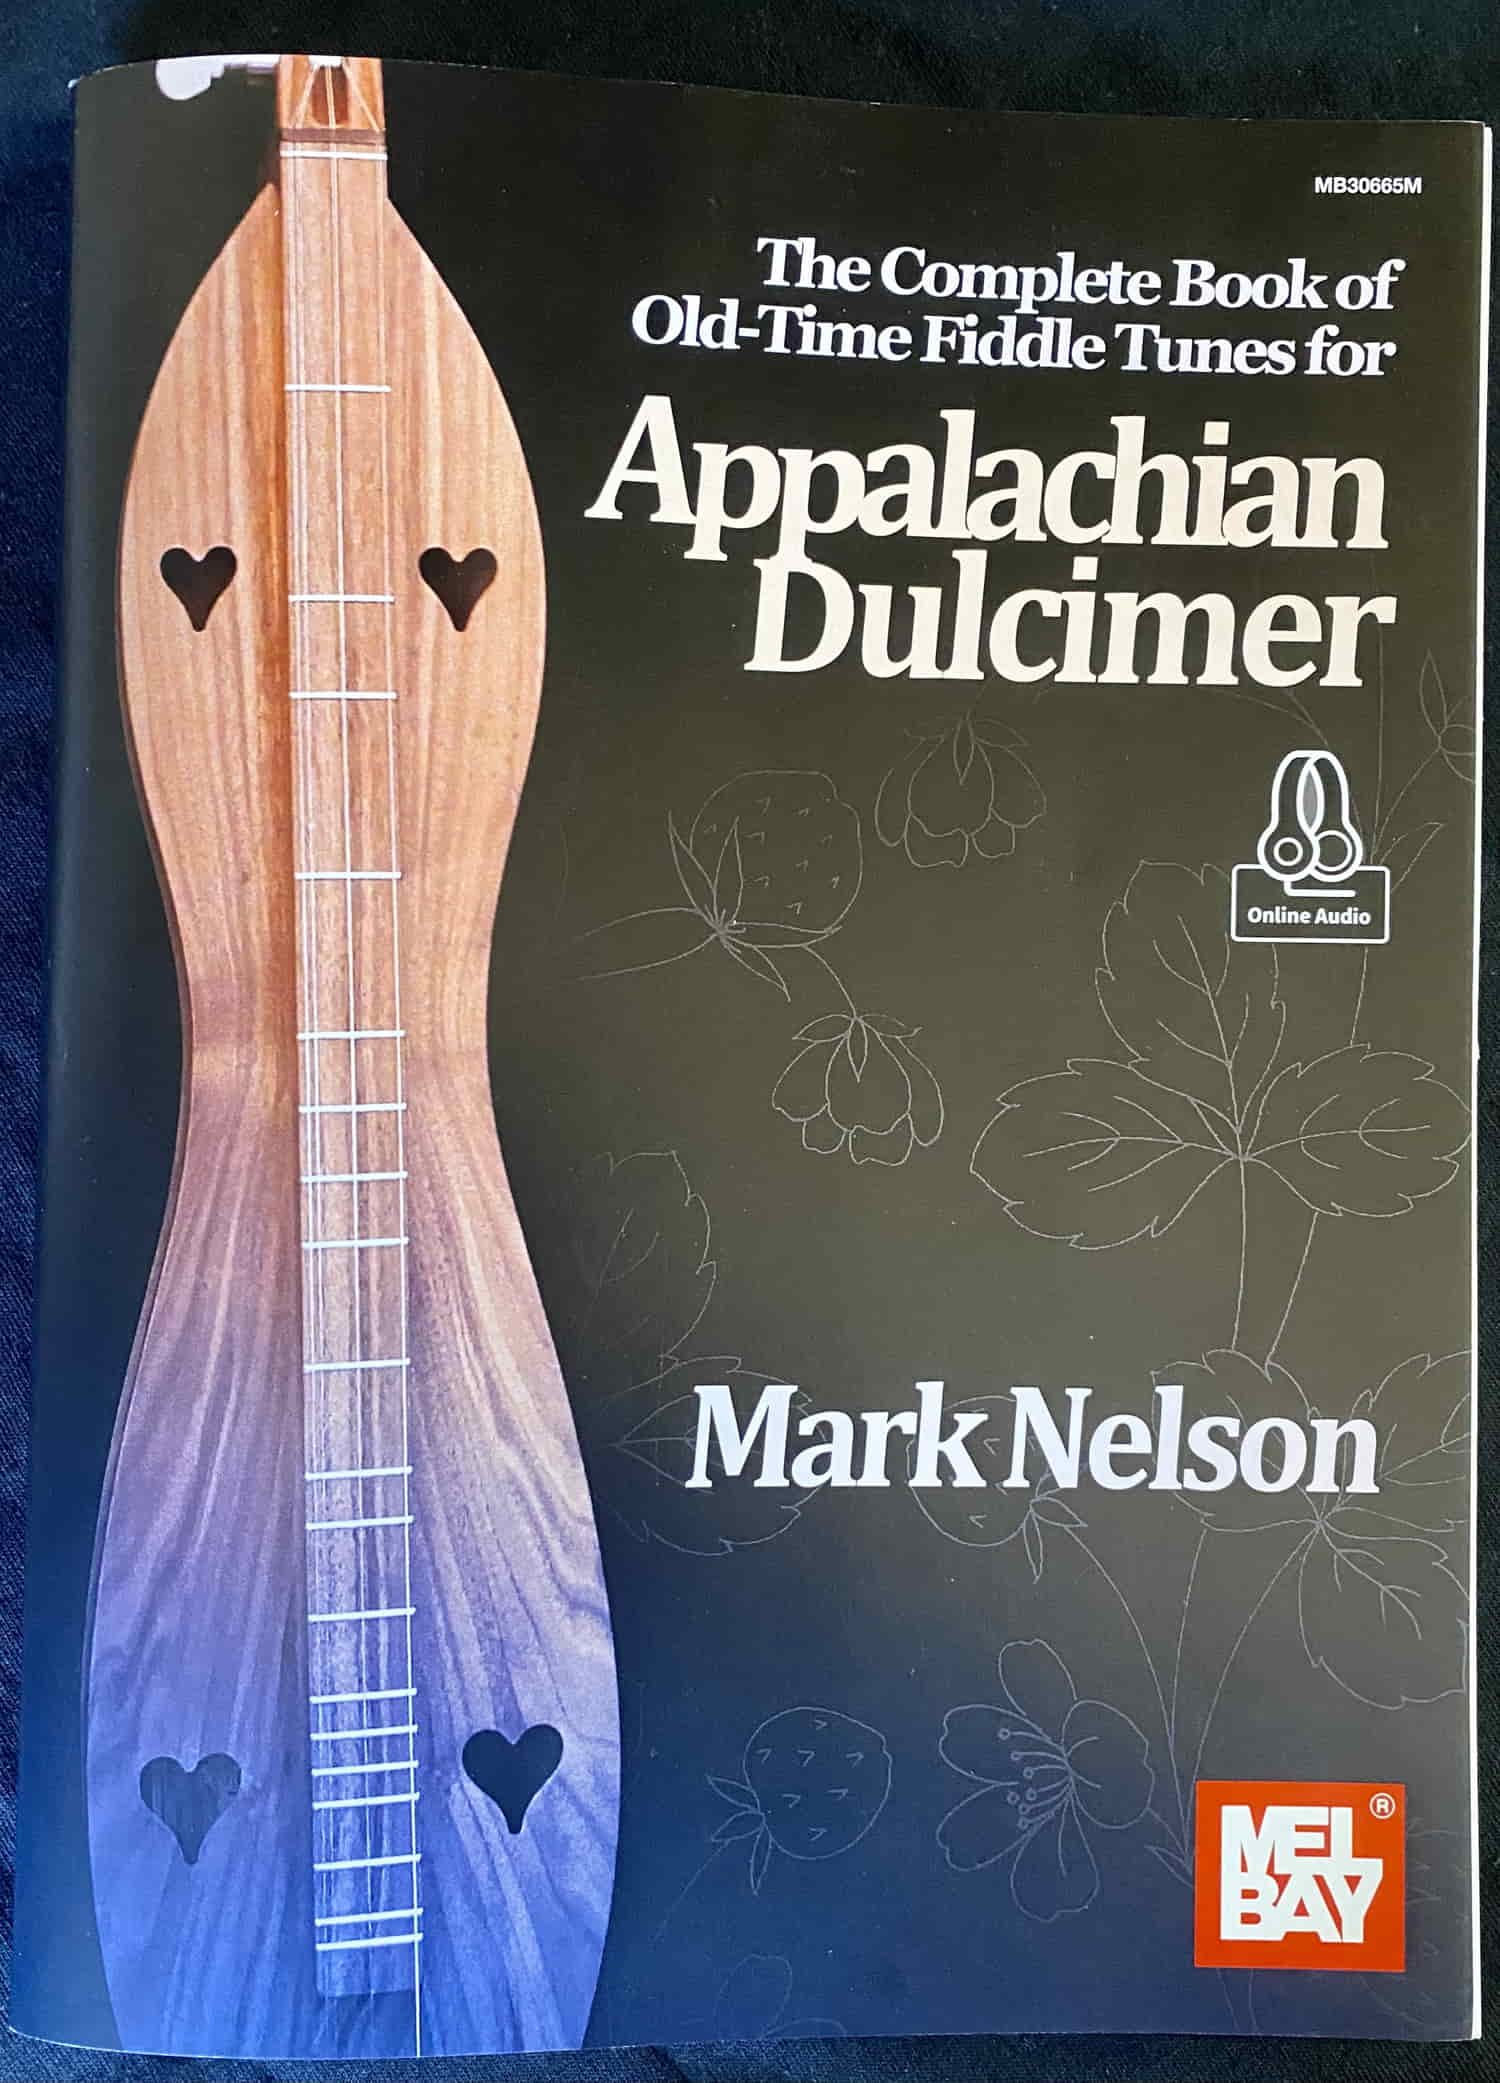 The Complete Book of Old-Time Fiddle Tunes for Appalachian Dulcimer - by Mark Nelson